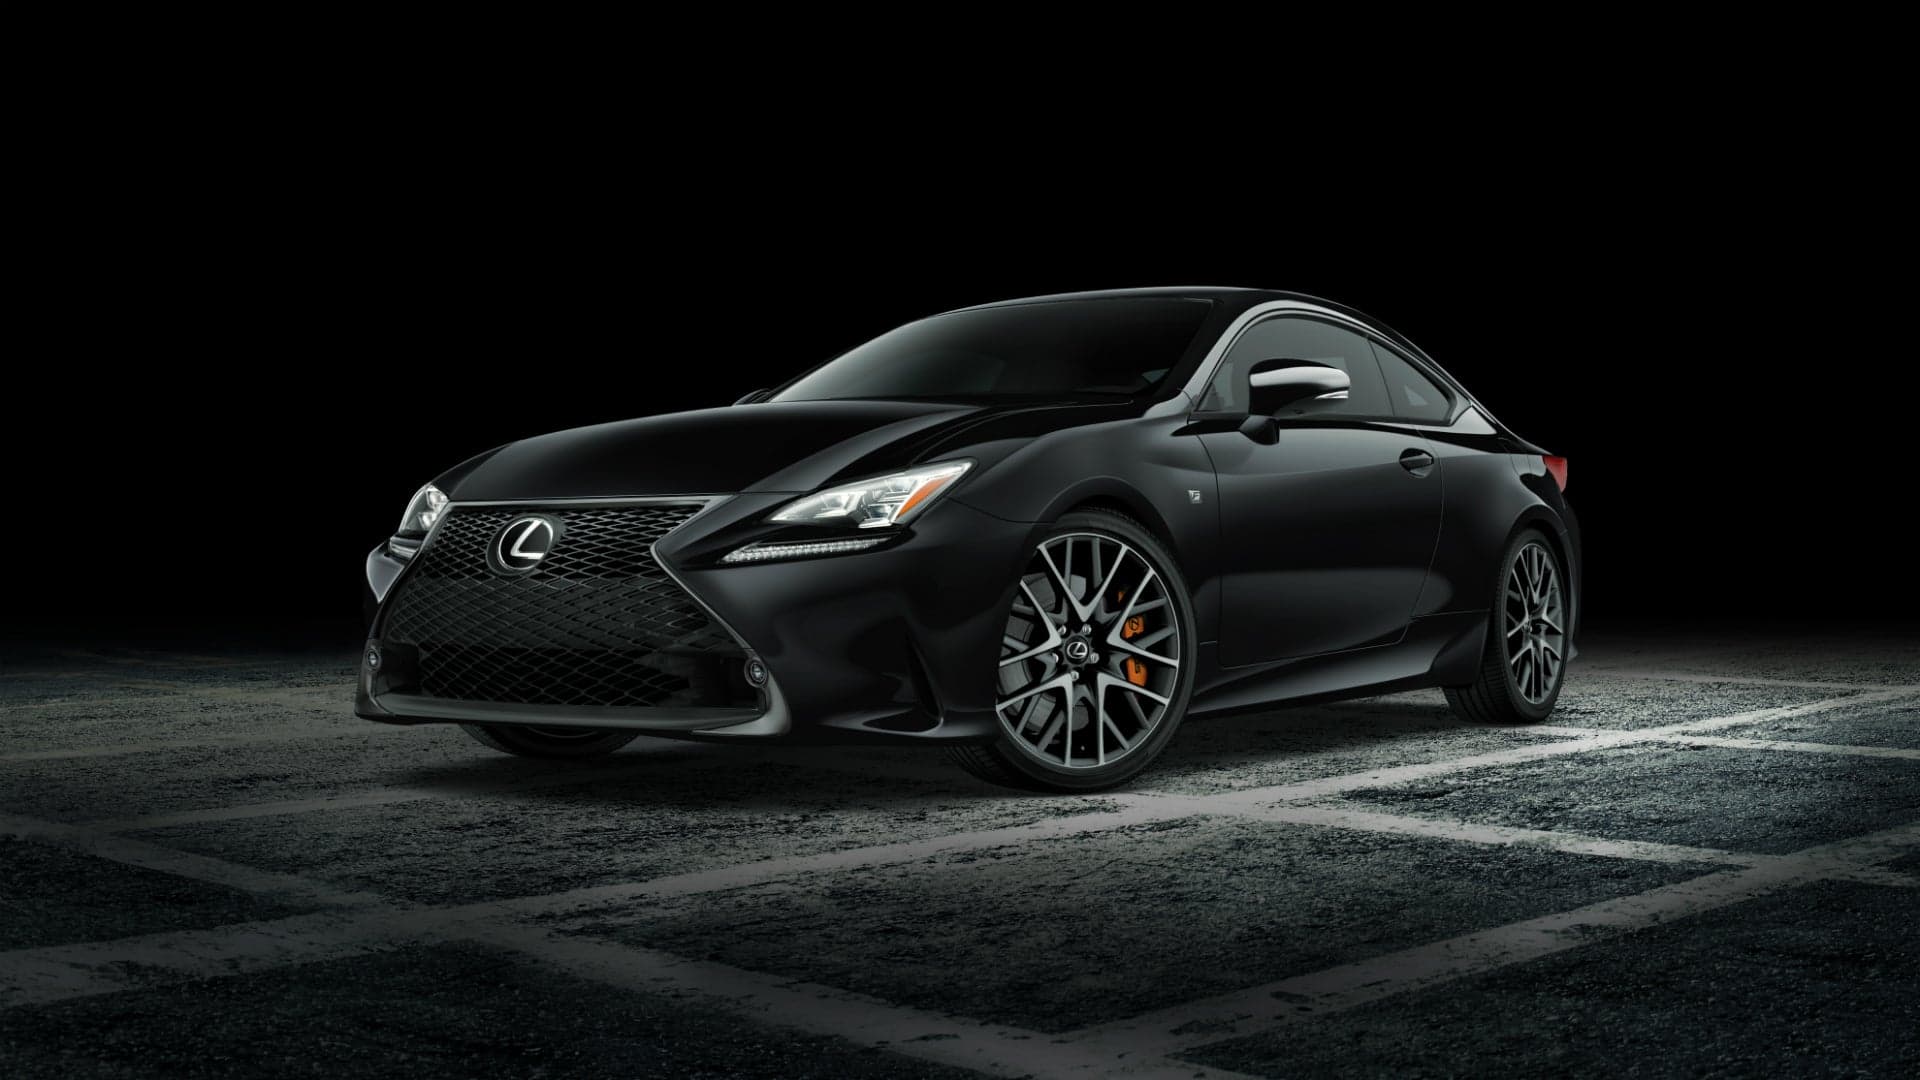 Lexus Reveals Black Line Special Edition for the RC F SPORT Series, Limited to 650 Units